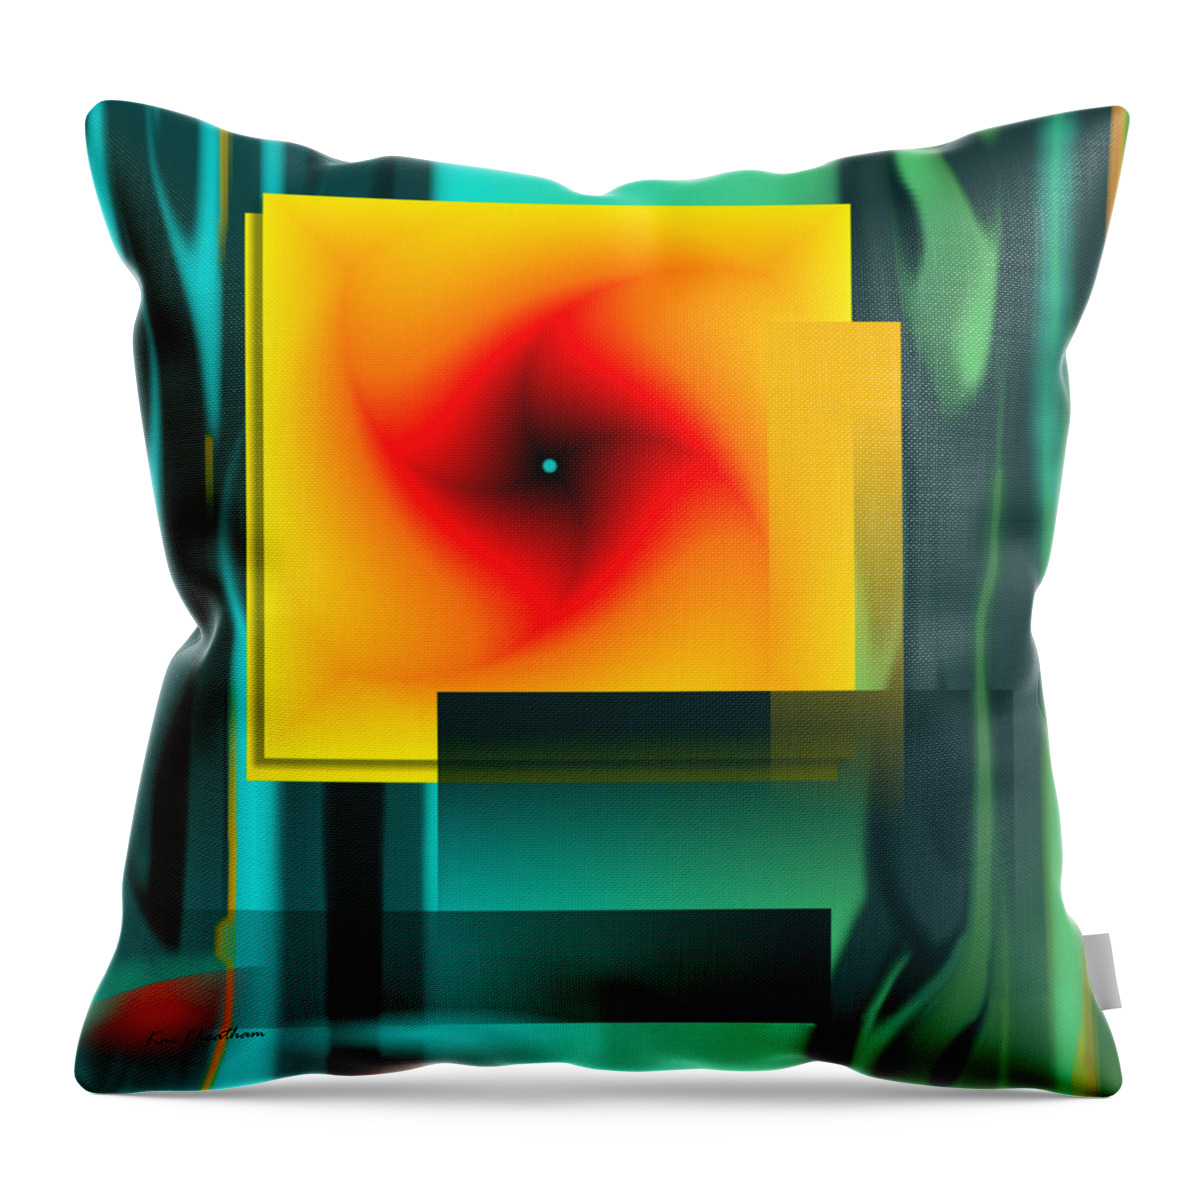 Computer Art Throw Pillow featuring the digital art Square Abstract by Kae Cheatham